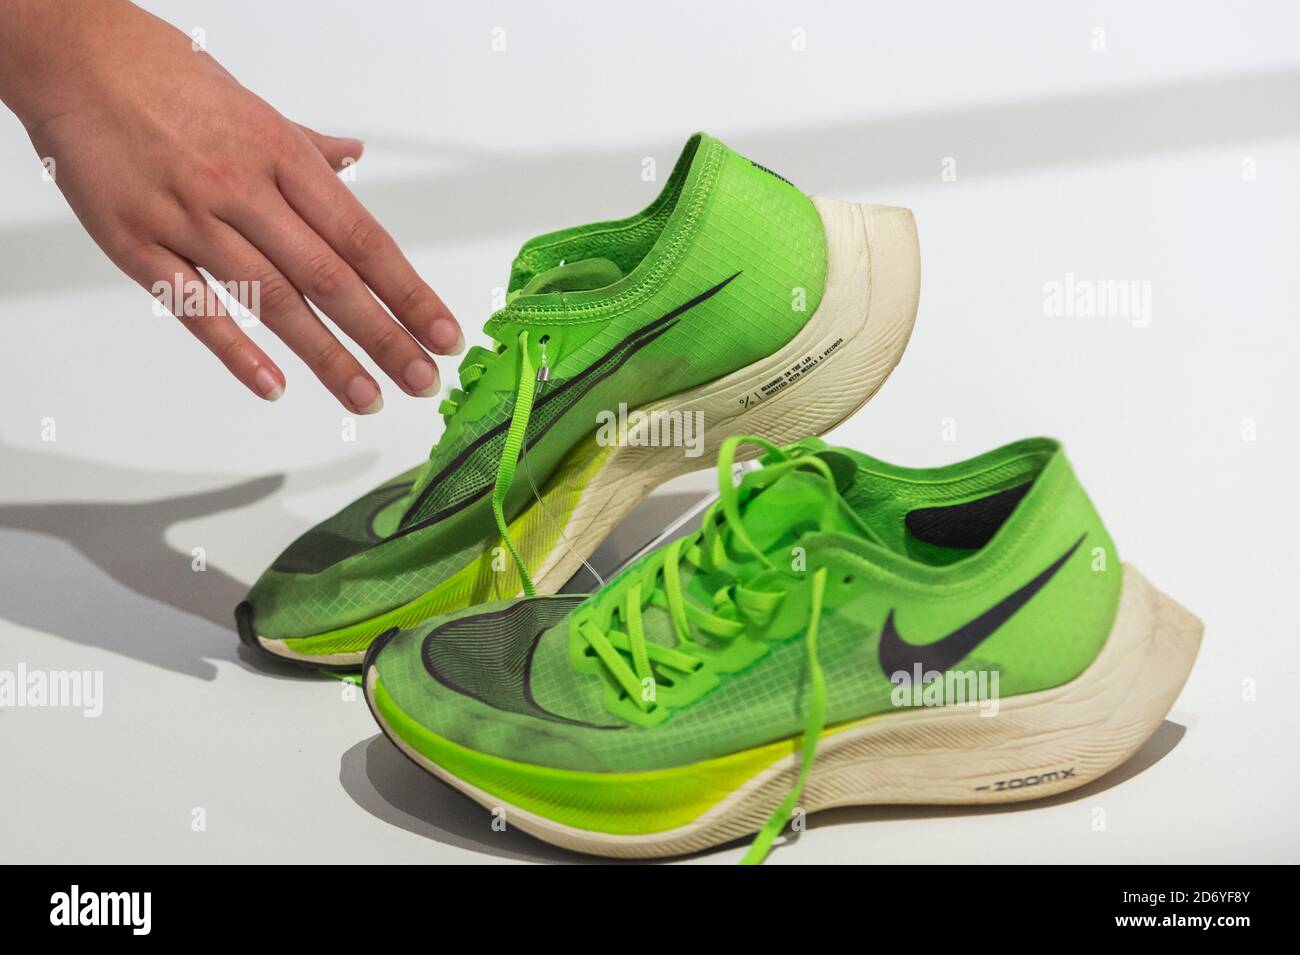 London, UK. 20 October 2020. The "Nike Zoom X Vaporfly NEXT%" running shoes  by designers at Nike Sport Research, as worn by Eliud Kipchoge to break the  two hour marathon barrier. Preview